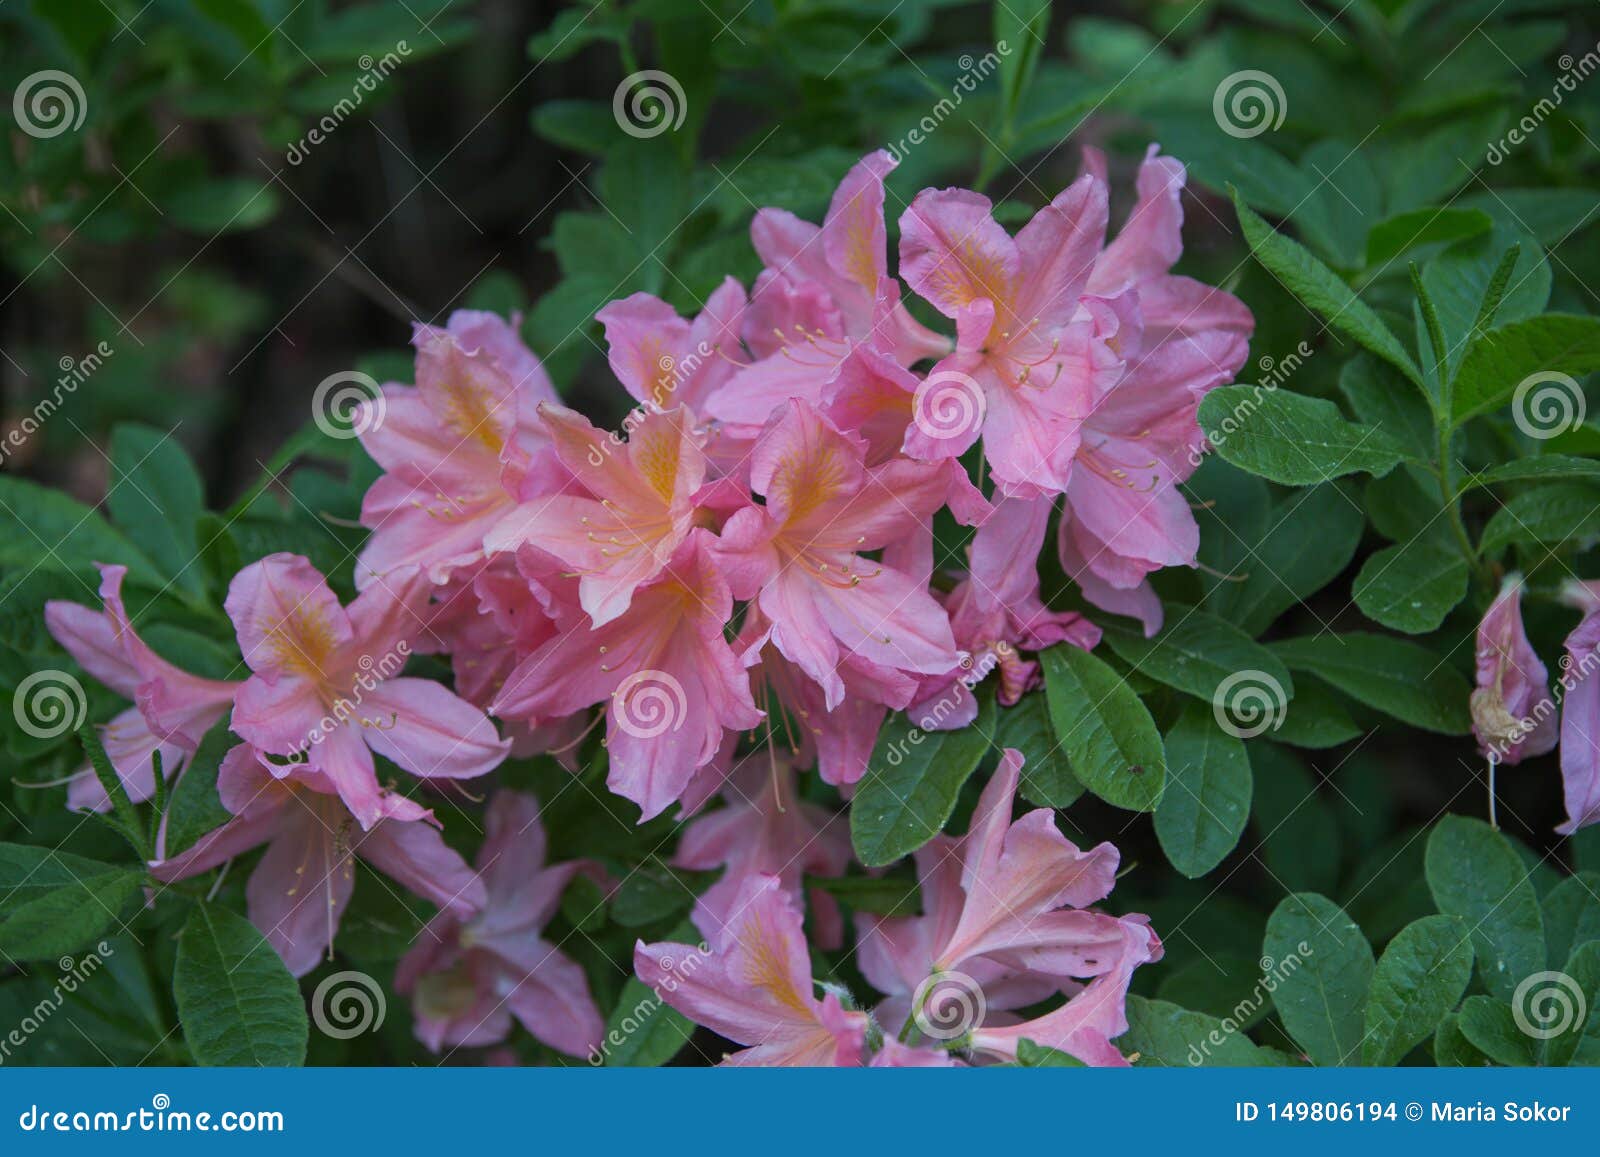 Rhododendron Plants In Bloom With Flowers Of Different Colors Azalea Bushes In The Park With Different Flower Colors Rhododendro Stock Photo Image Of Landscape Hinodegiri 149806194